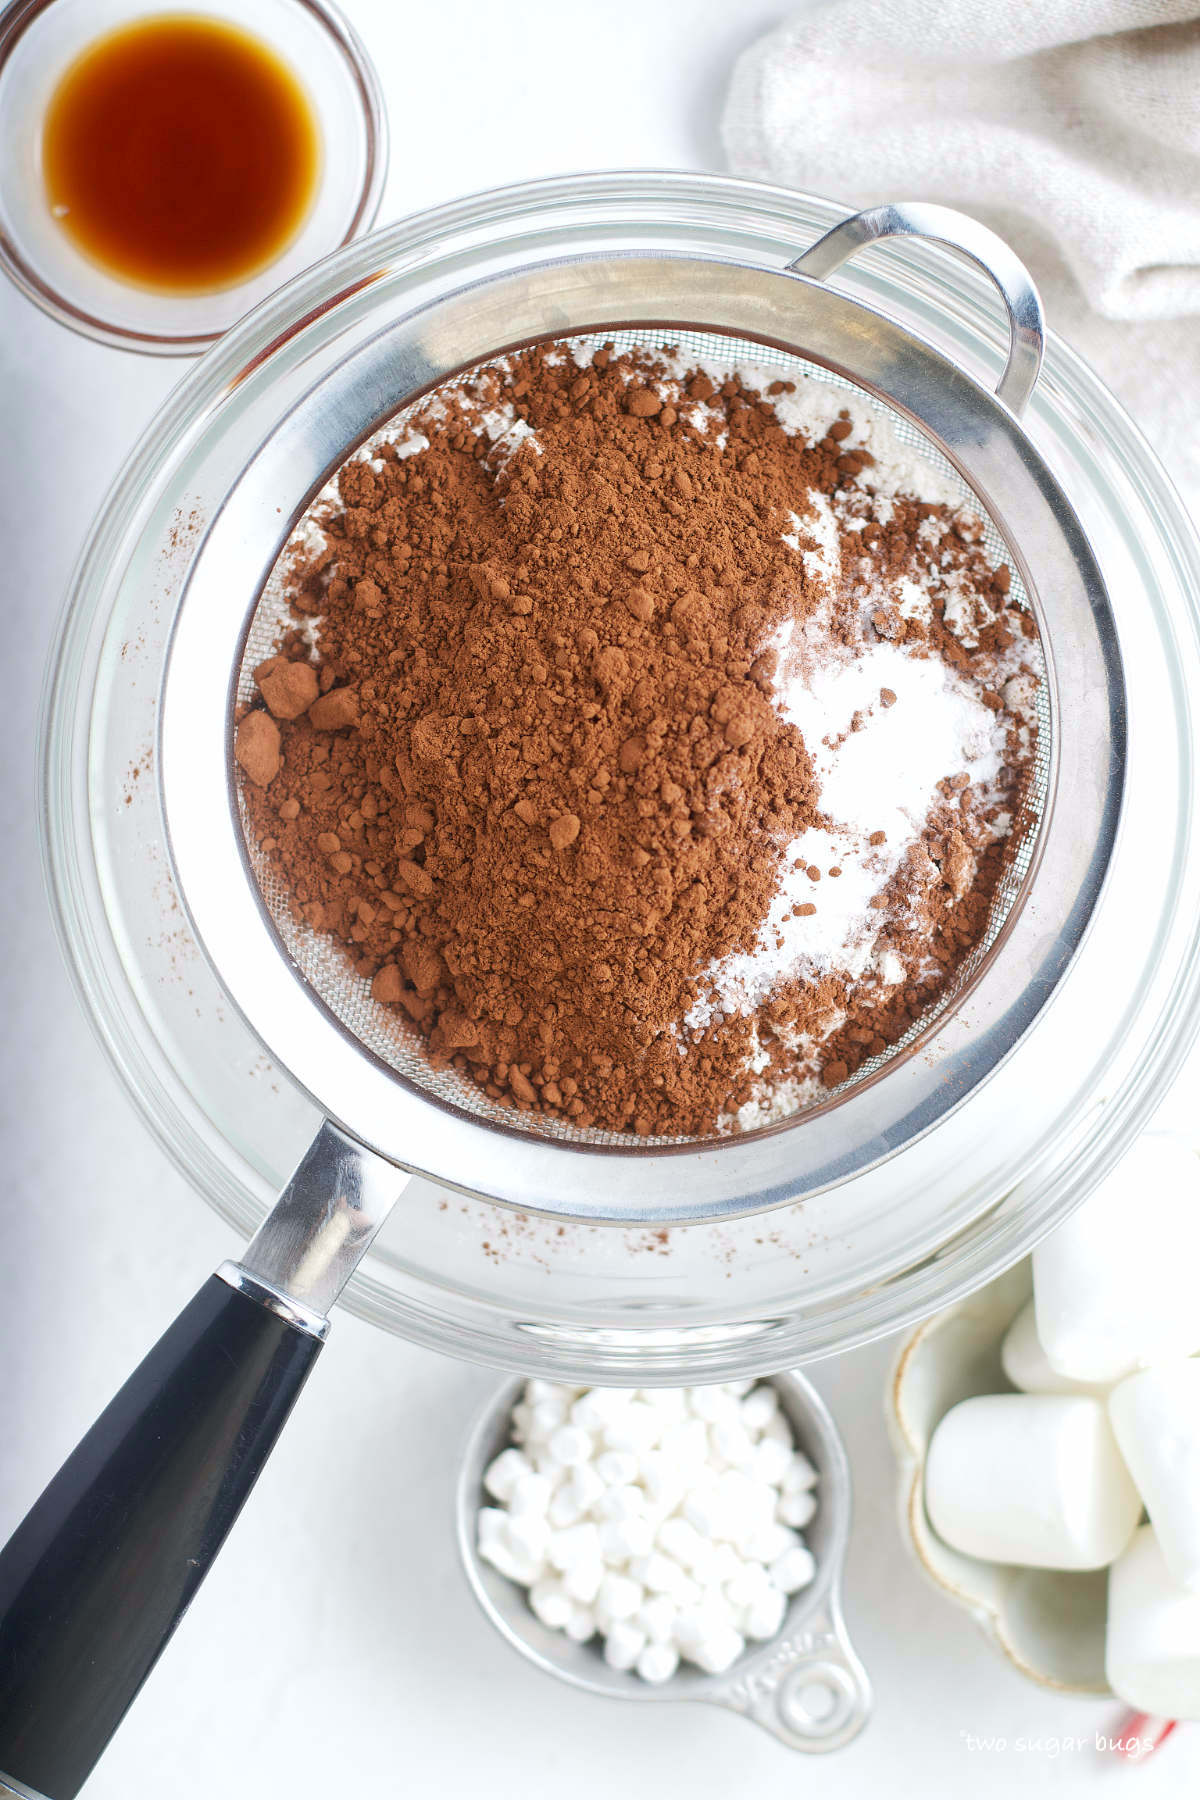 flour, cocoa powder, baking soda and salt in a sifter